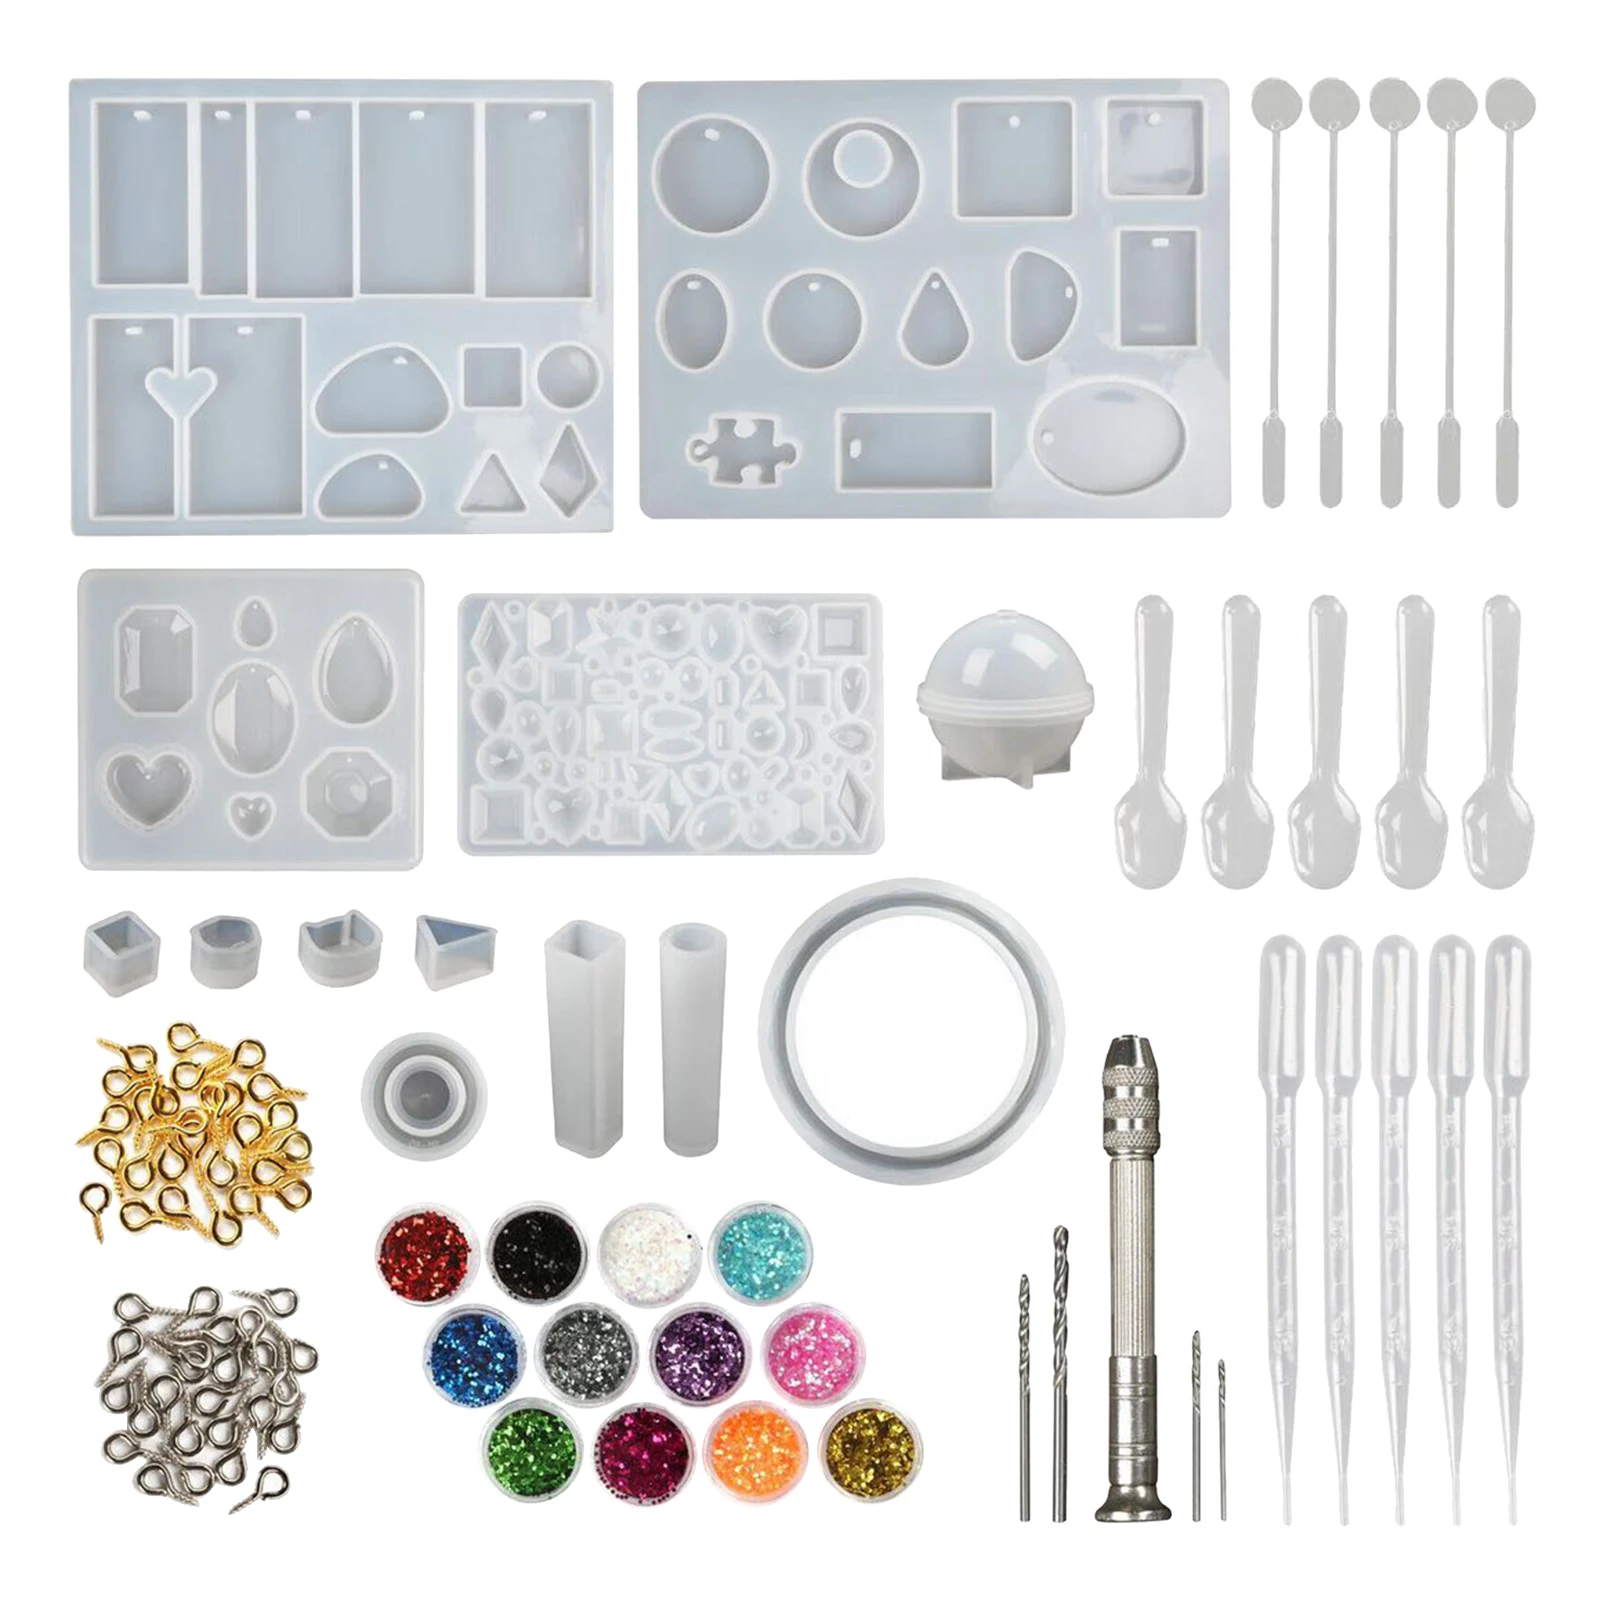 

142pcs Epoxy Resin Silicone Casting Molds Kits Tools with 10 PCS Silicone Resin Molds, Glitter Powder, Eye Pins, Drills